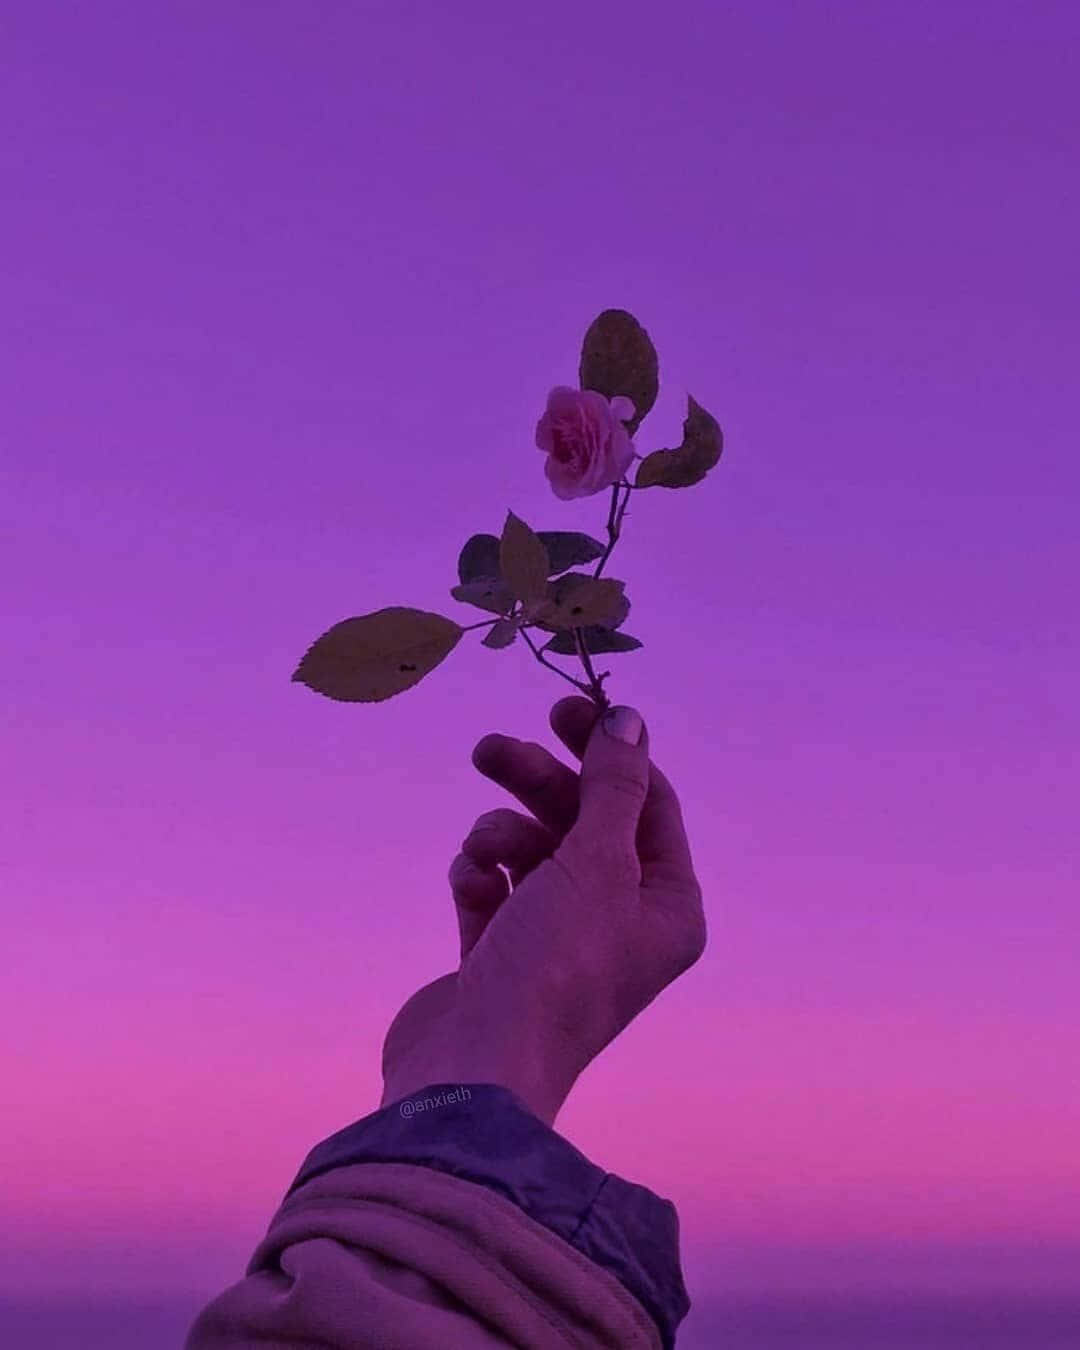 A Hand Holding A Flower In Front Of A Purple Sky Wallpaper